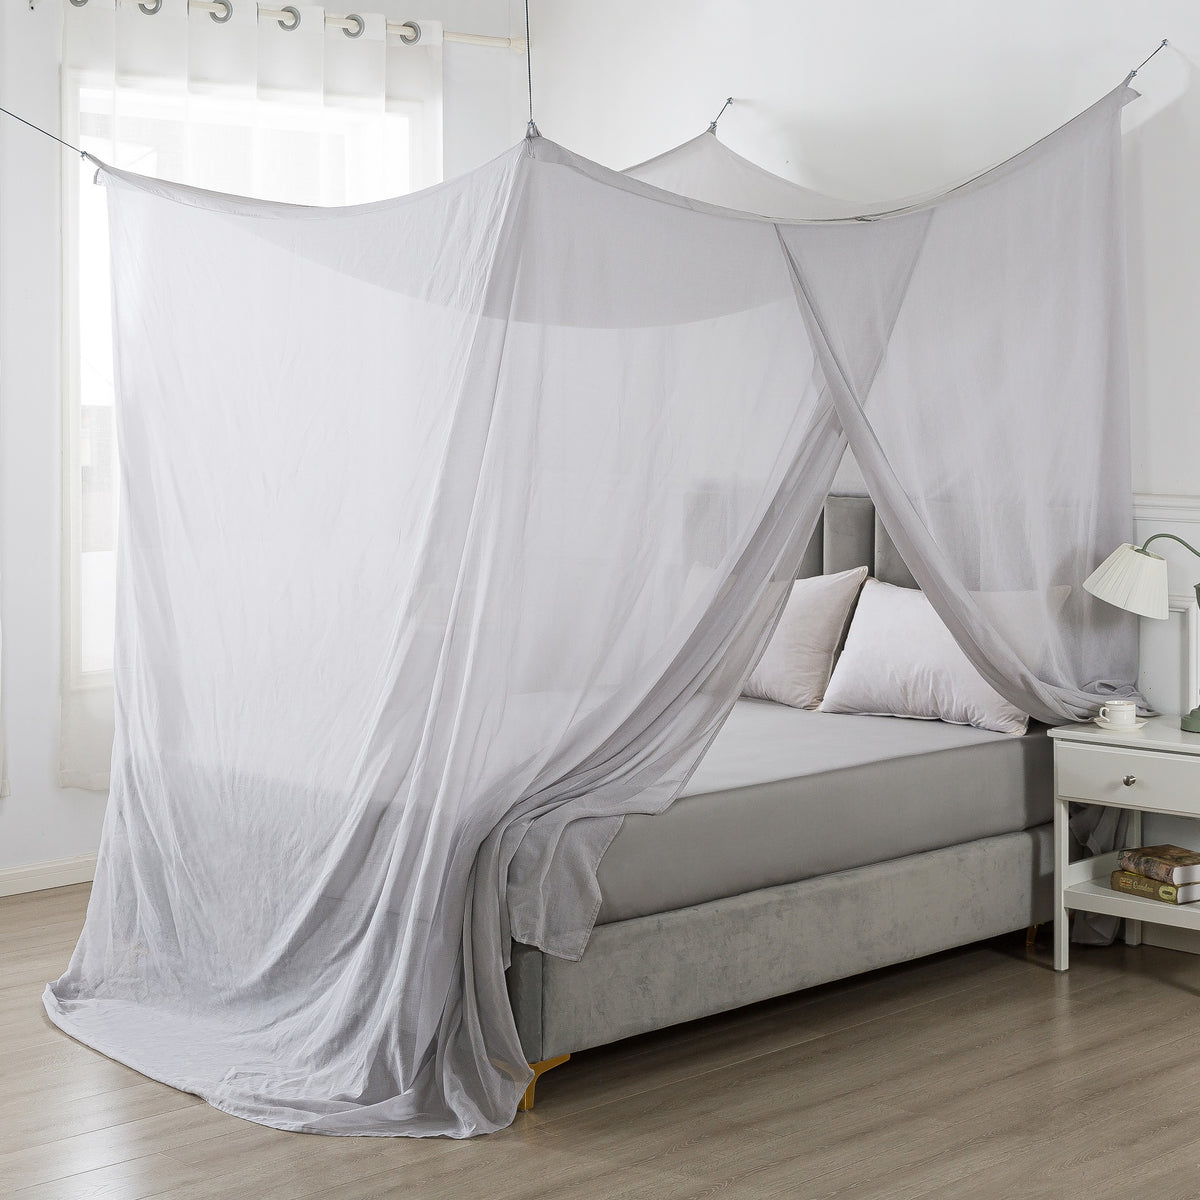 Silver Cotton Naturell Tent